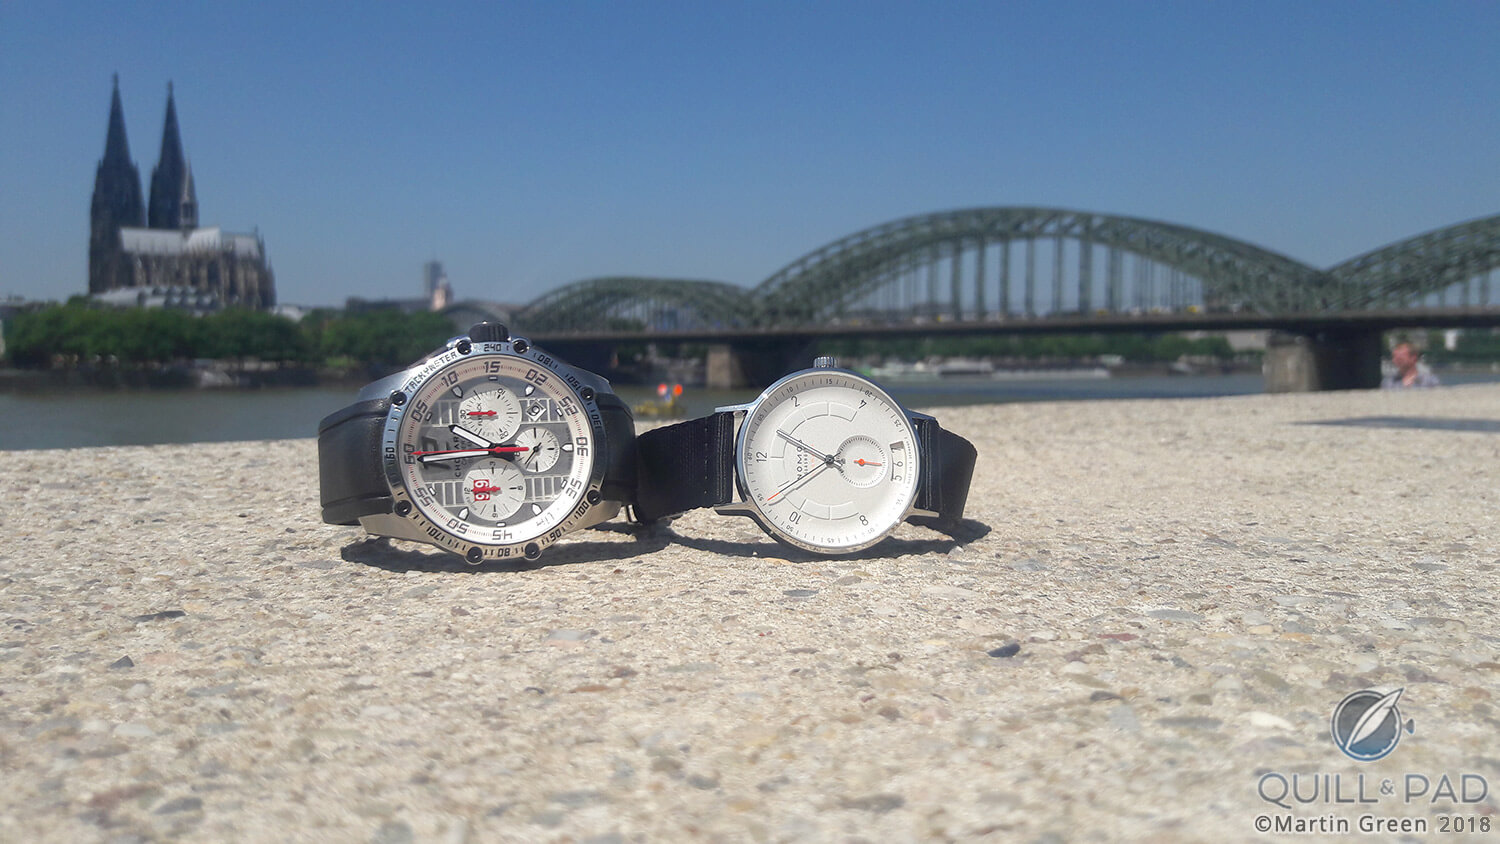 The Chopard Superfast Chrono Porsche 919 Edition and the Nomos Glashütte Autobahn with the Cologne’s cathedral and the Deutz bridge in the background